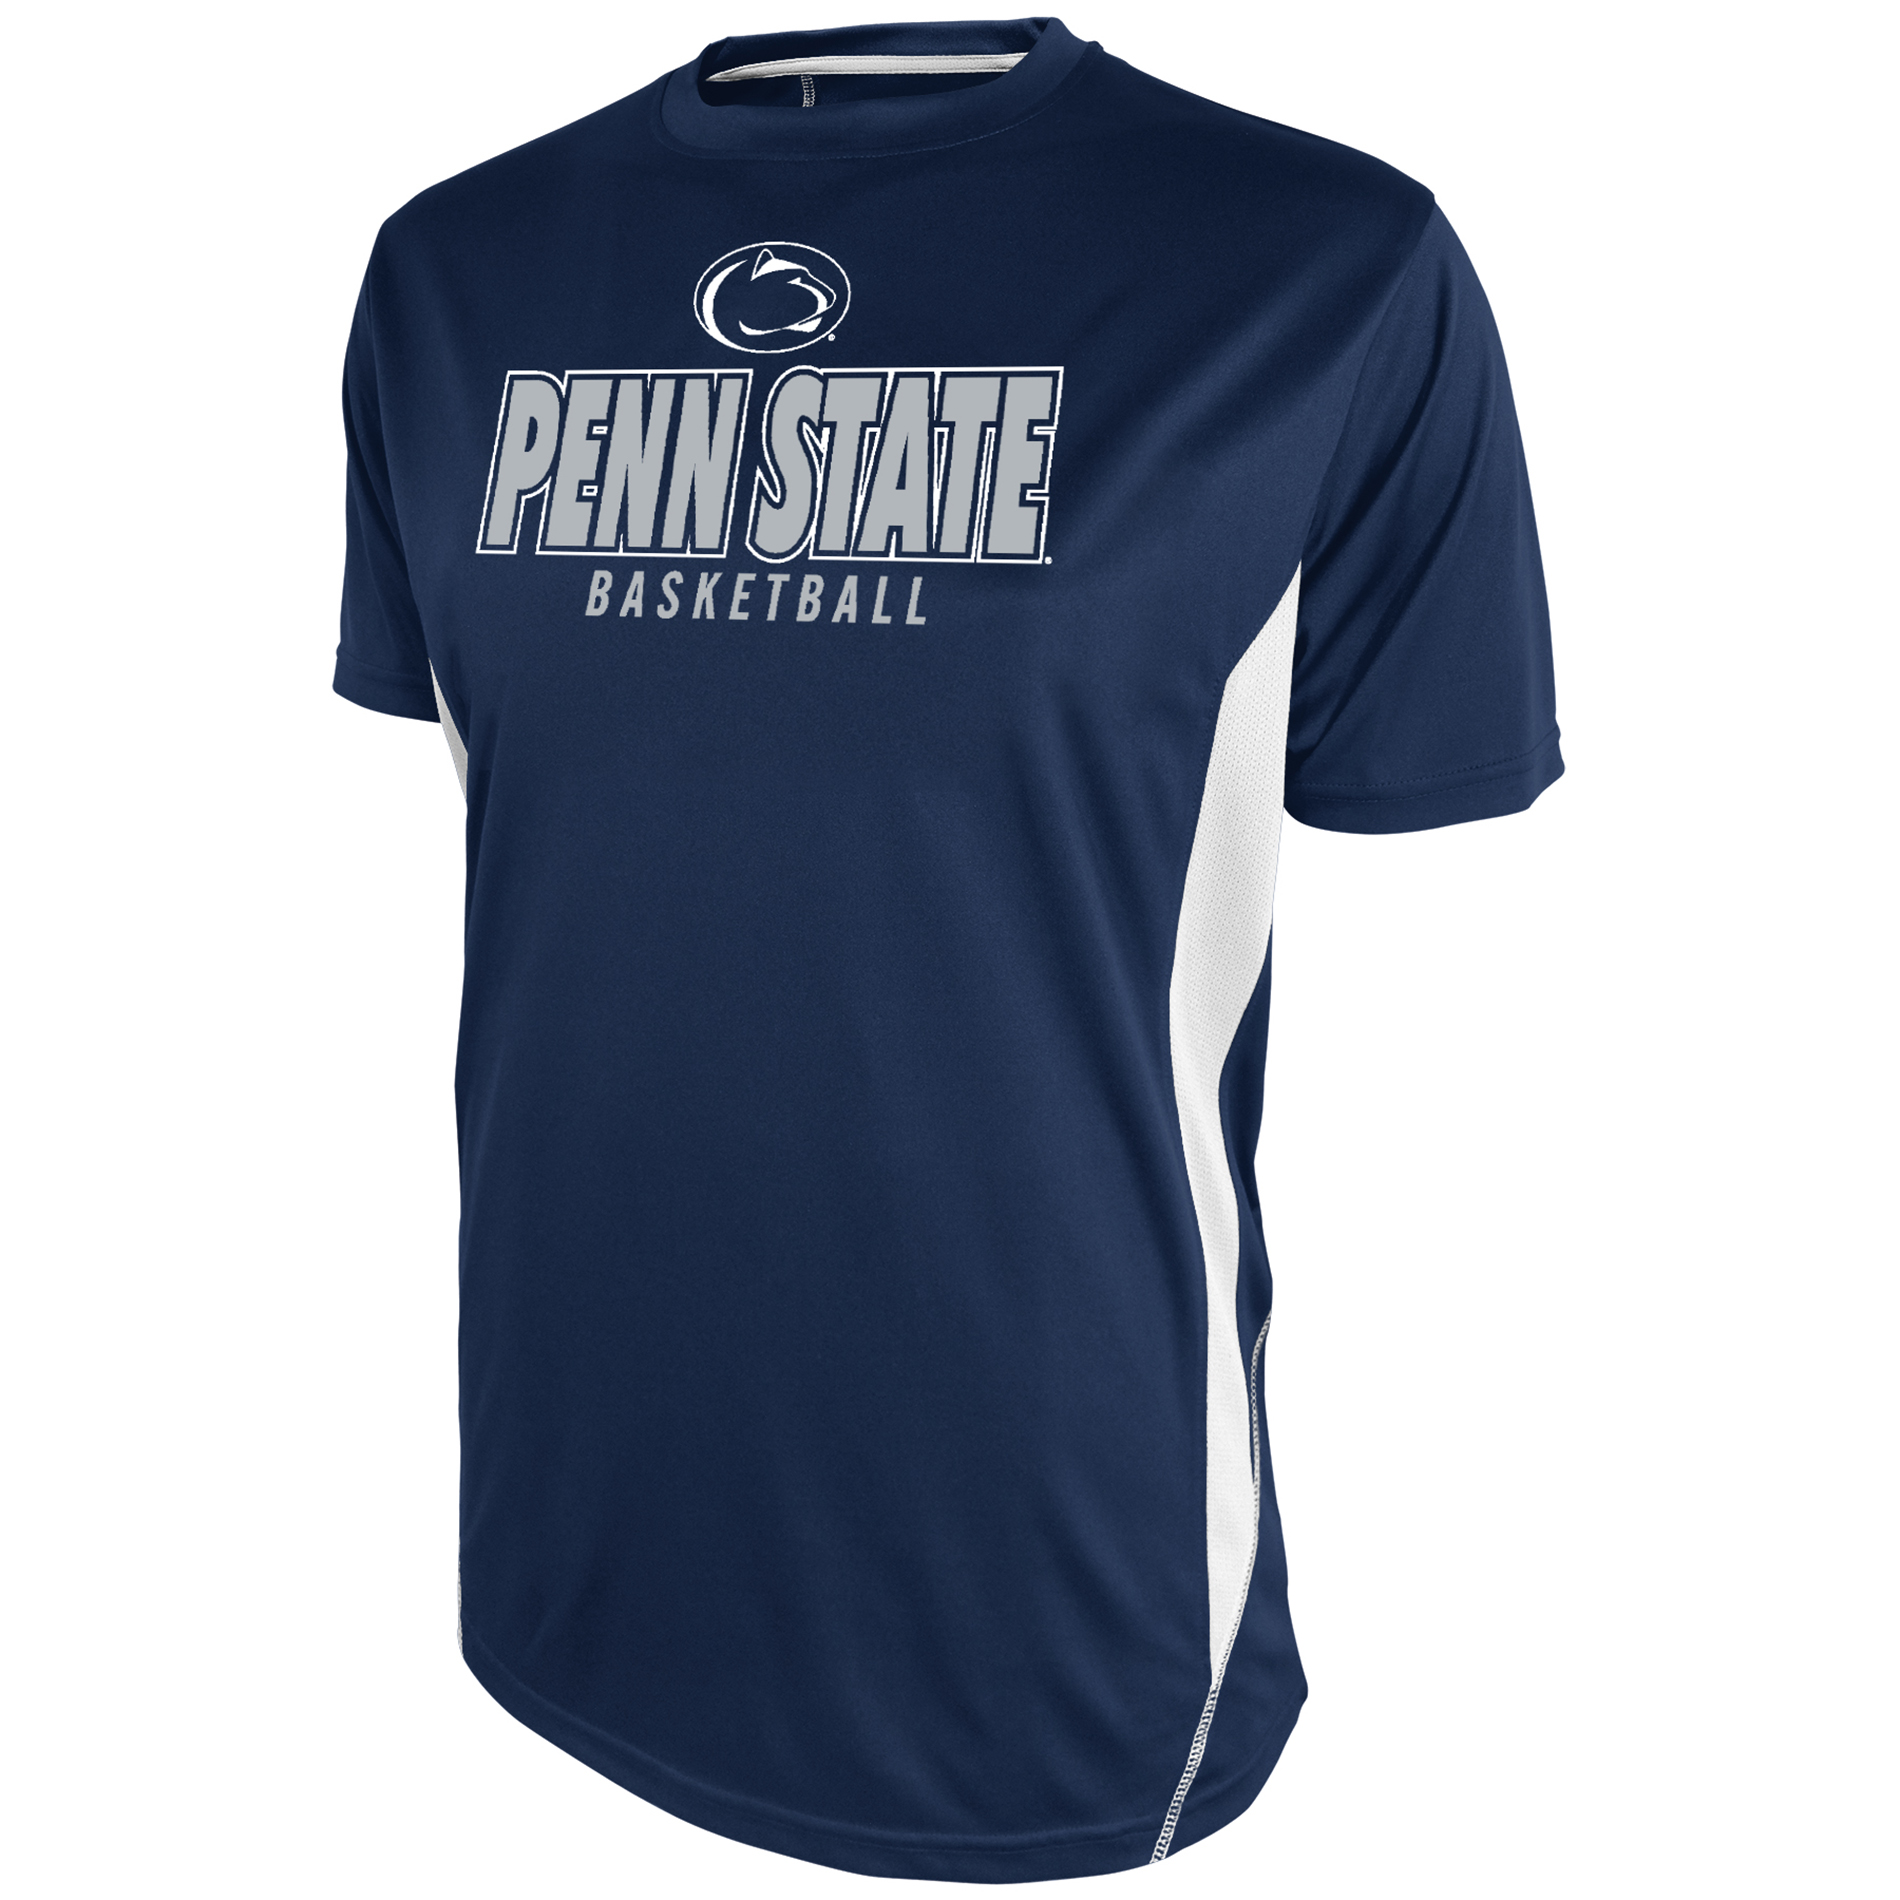 NCAA Mens' Penn State Nittany Lions Short Sleeve Athletic Tee